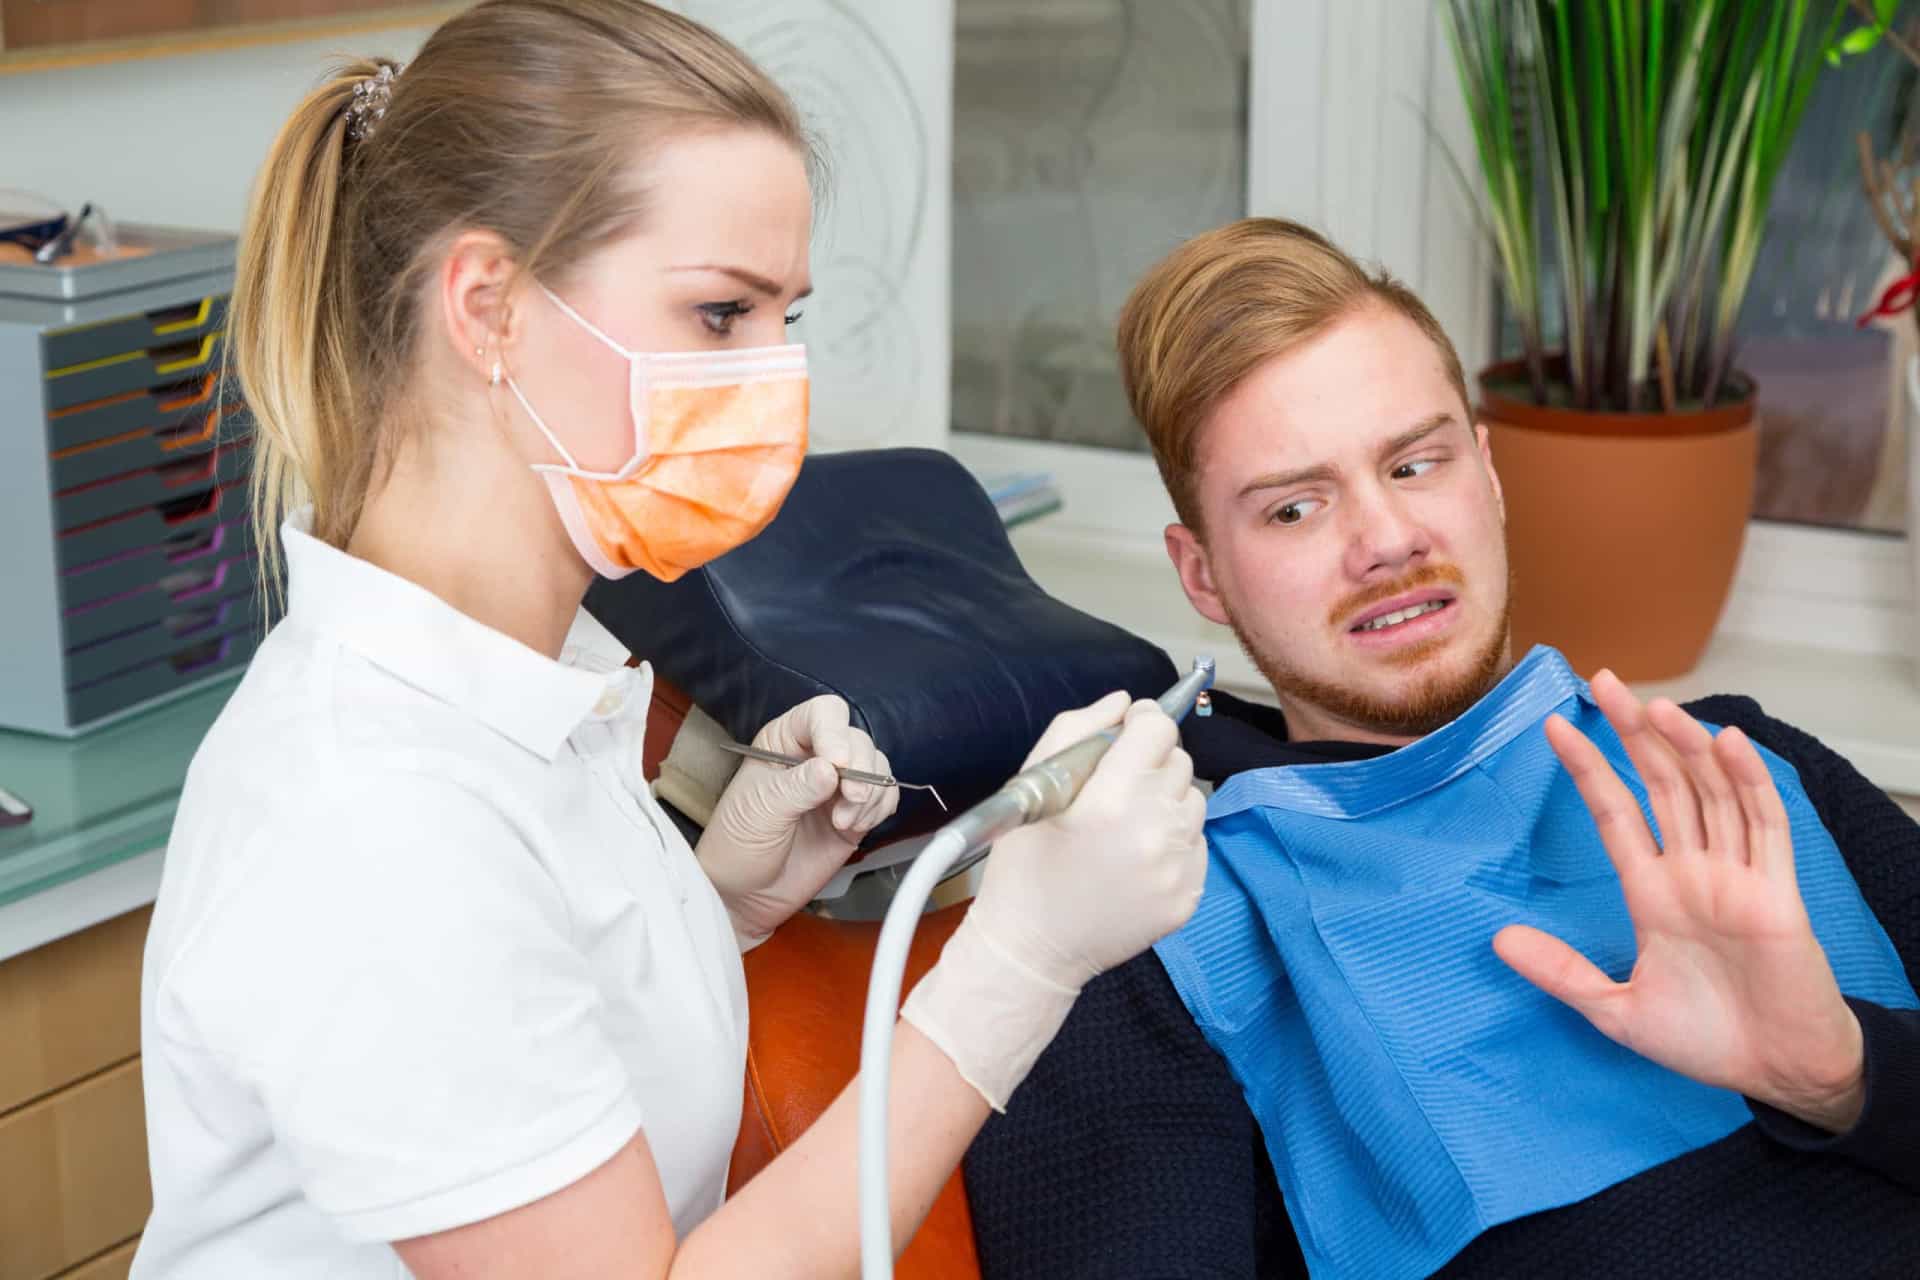 <p>It’s normal to feel a little bit nervous, but if you do experience a high level of anxiety, it's best to talk to your dentist beforehand. Dentists deal with these situations regularly, and will be able to advise you.</p><p>Sources: (<a href="https://www.healthdigest.com/382903/things-you-should-never-do-before-going-to-the-dentist/" rel="noopener">Health Digest</a>) (<a href="https://www.verywellhealth.com/how-to-prepare-for-oral-surgery-1059320" rel="noopener">Verywell Health</a>)</p><p>See also: <a href="https://www.starsinsider.com/health/508446/why-were-all-brushing-our-teeth-wrong">Why we're all brushing our teeth wrong</a></p><p>You may also like:<a href="https://www.starsinsider.com/n/502876?utm_source=msn.com&utm_medium=display&utm_campaign=referral_description&utm_content=516746en-en"> The prophecies of English witch Mother Shipton</a></p>